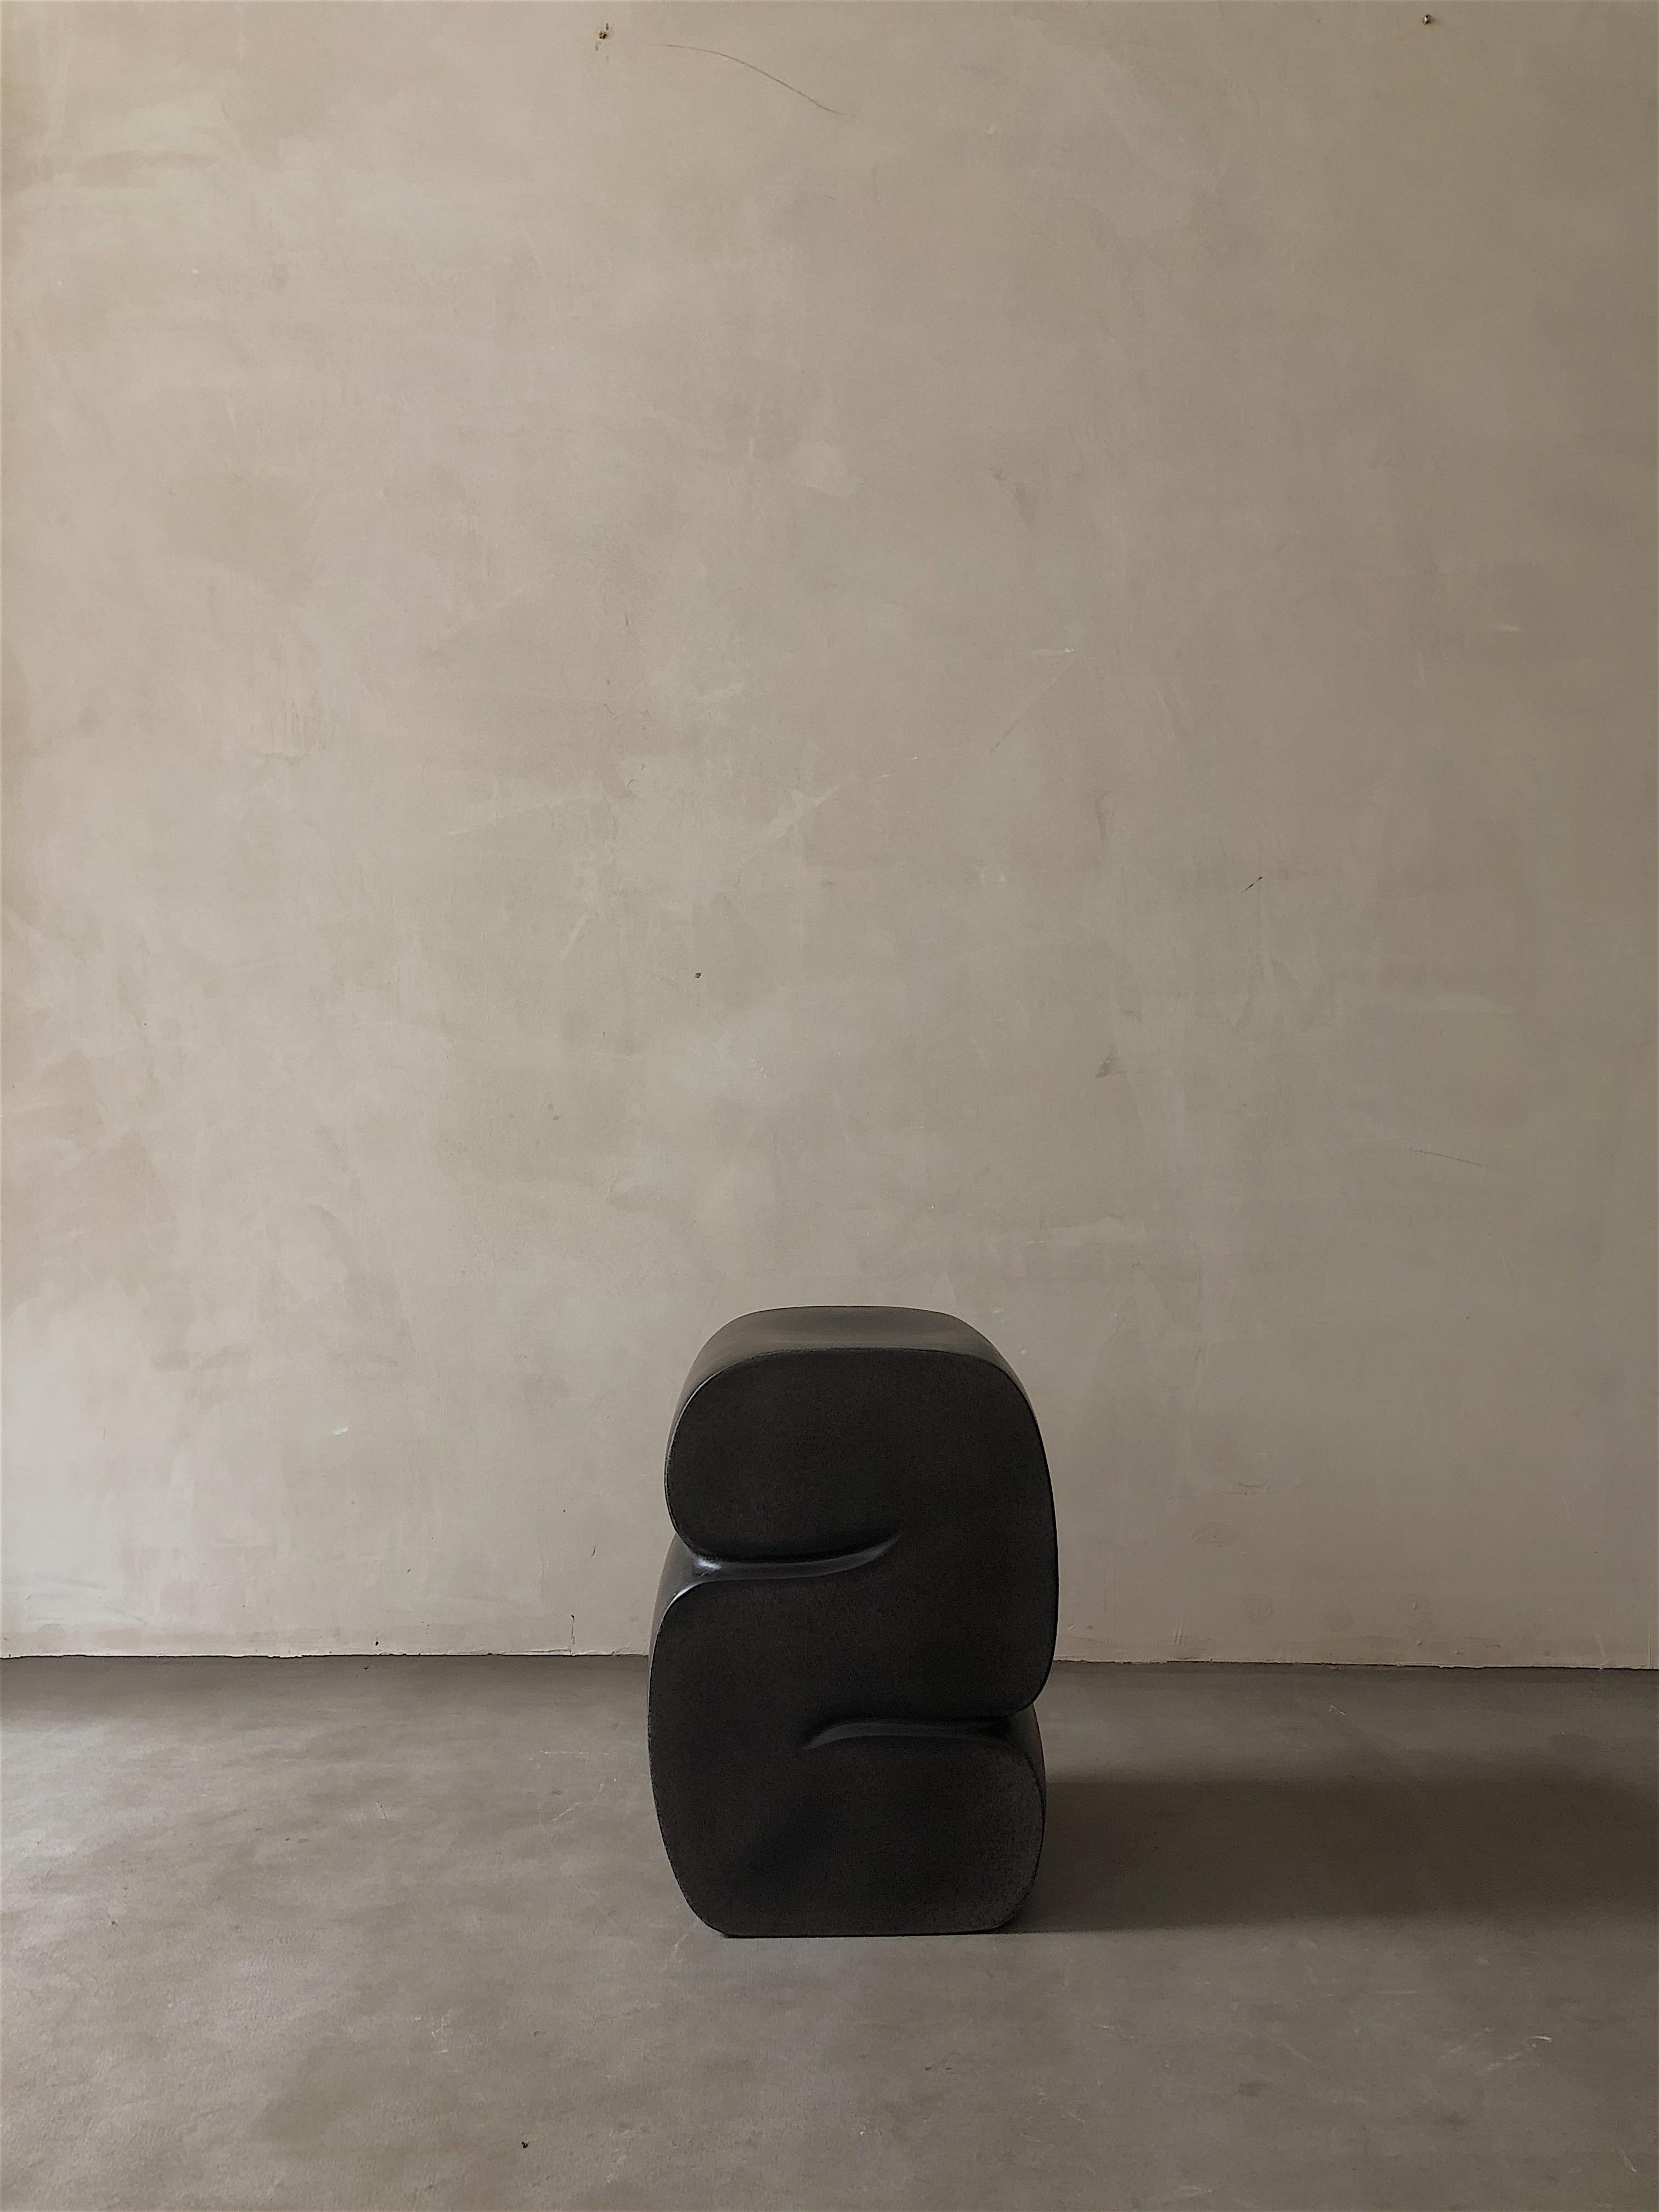 Coffee stool by Karstudio
Materials: FRP
Dimensions: 32 x 32 x 45 cm

It shapes in a curl-up position, casual meanwhile restrained. The side designed as a cross-section of the furniture to present the curve and texture.

Kar- is the root of